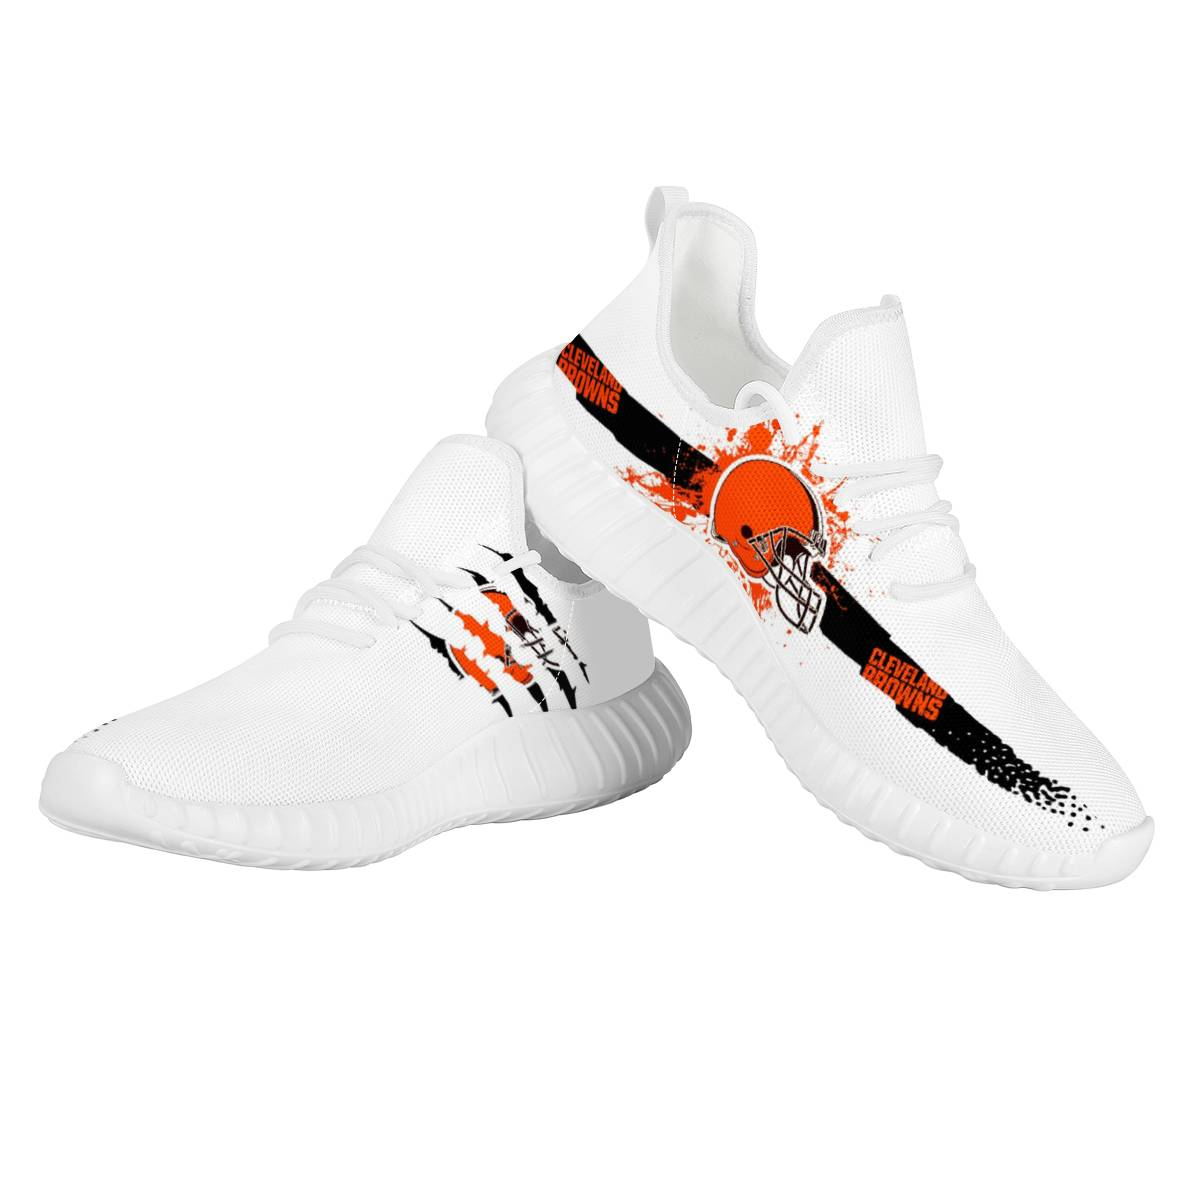 Women's Cleveland Browns Mesh Knit Sneakers/Shoes 005